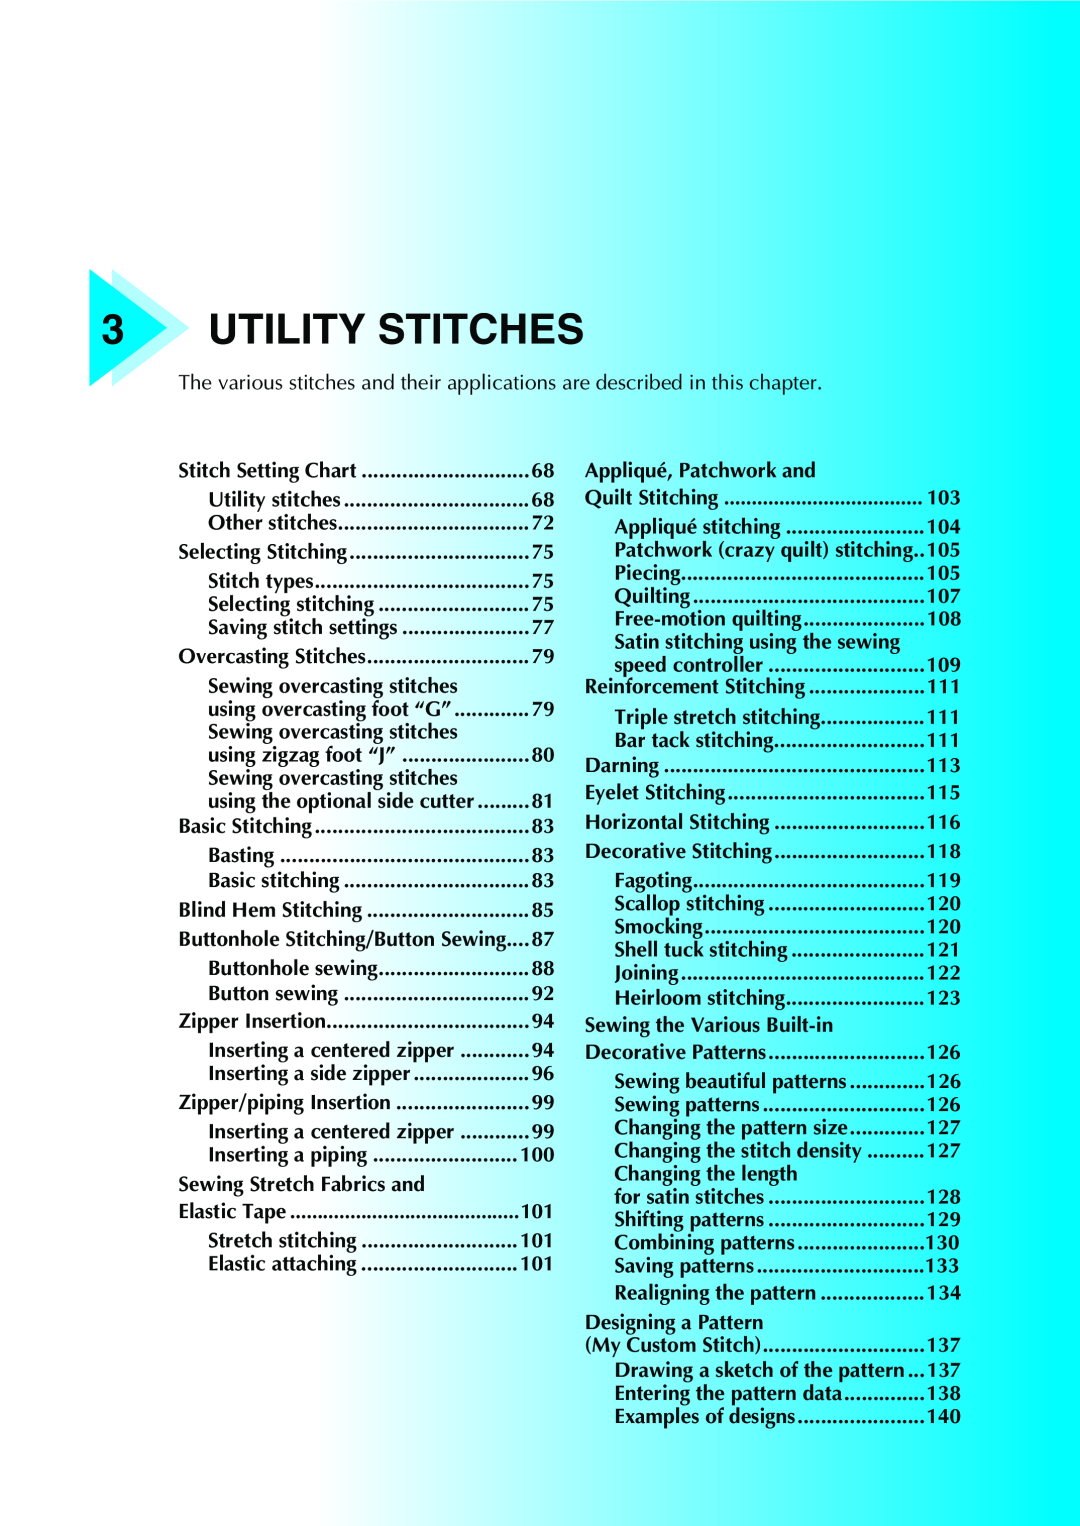 Brother CPS5XVY Utility Stitches, Sewing overcasting stitches, Sewing Stretch Fabrics and, Appliqué, Patchwork and 